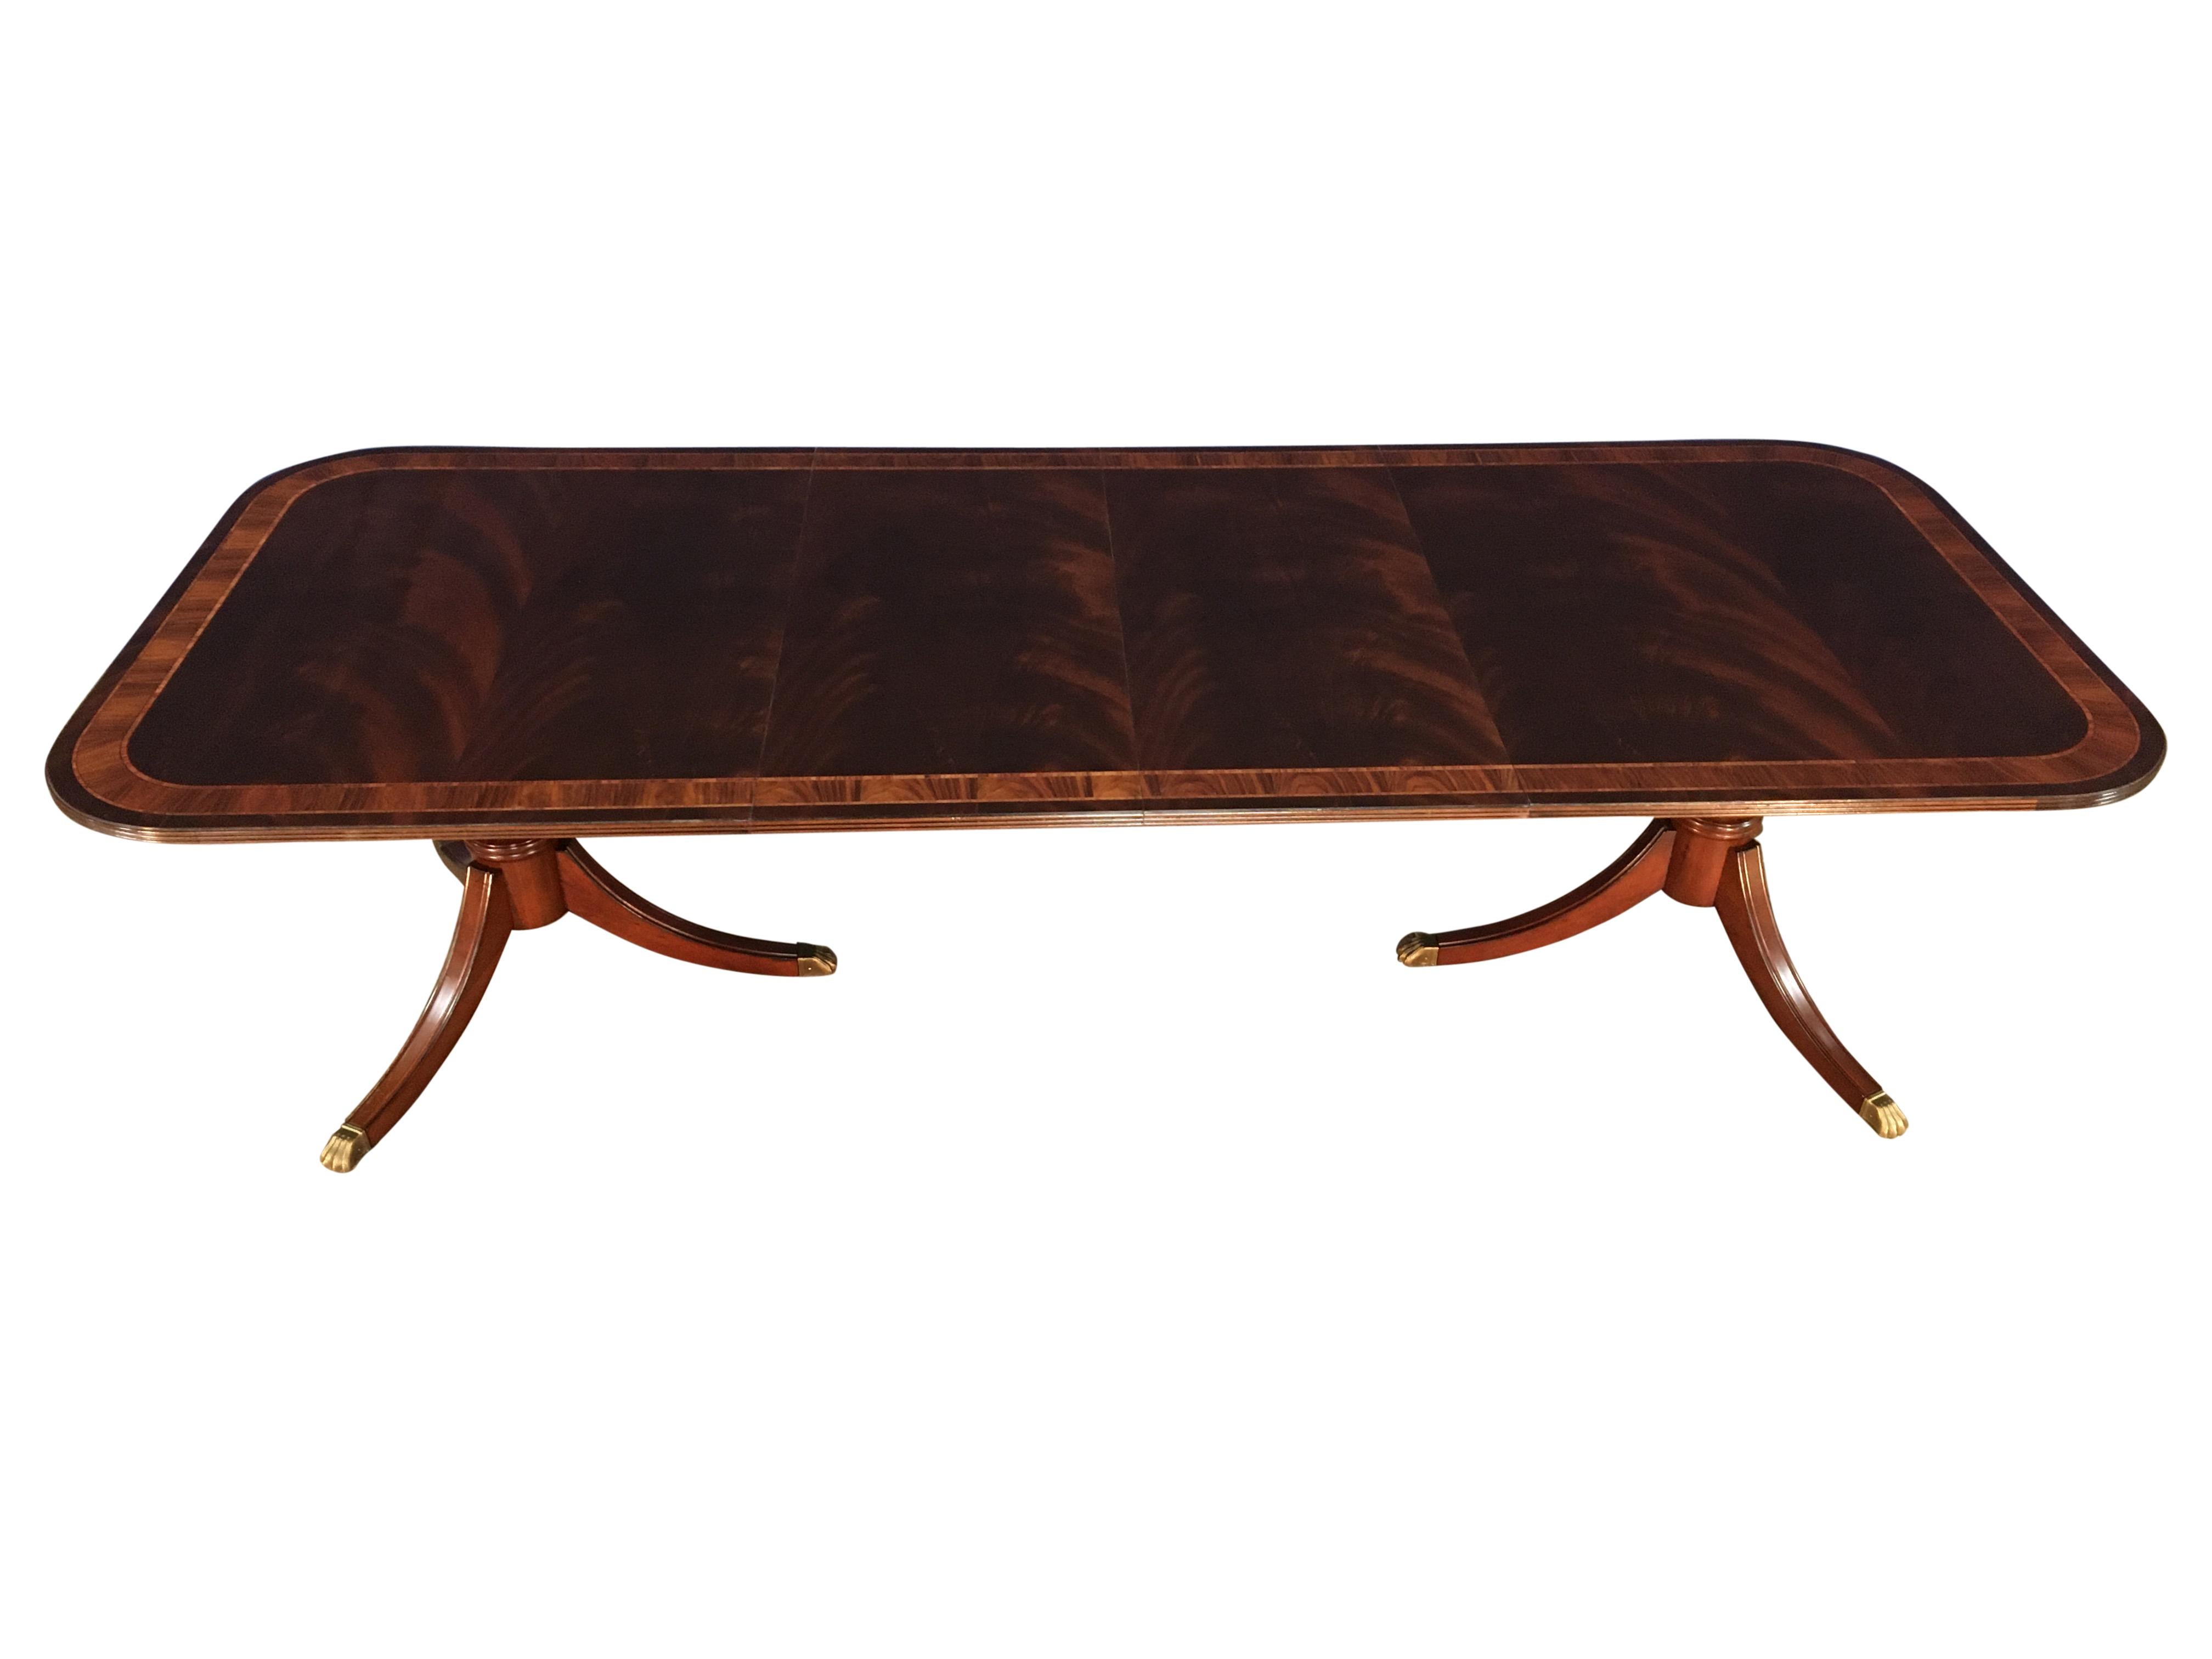 This is a made-to-order traditional mahogany dining table made in the Leighton Hall shop. It features a field of slip-matched swirly crotch mahogany from West Africa. It has a swirly crotch mahogany outer border with a Santos Rosewood (Pau Ferro)